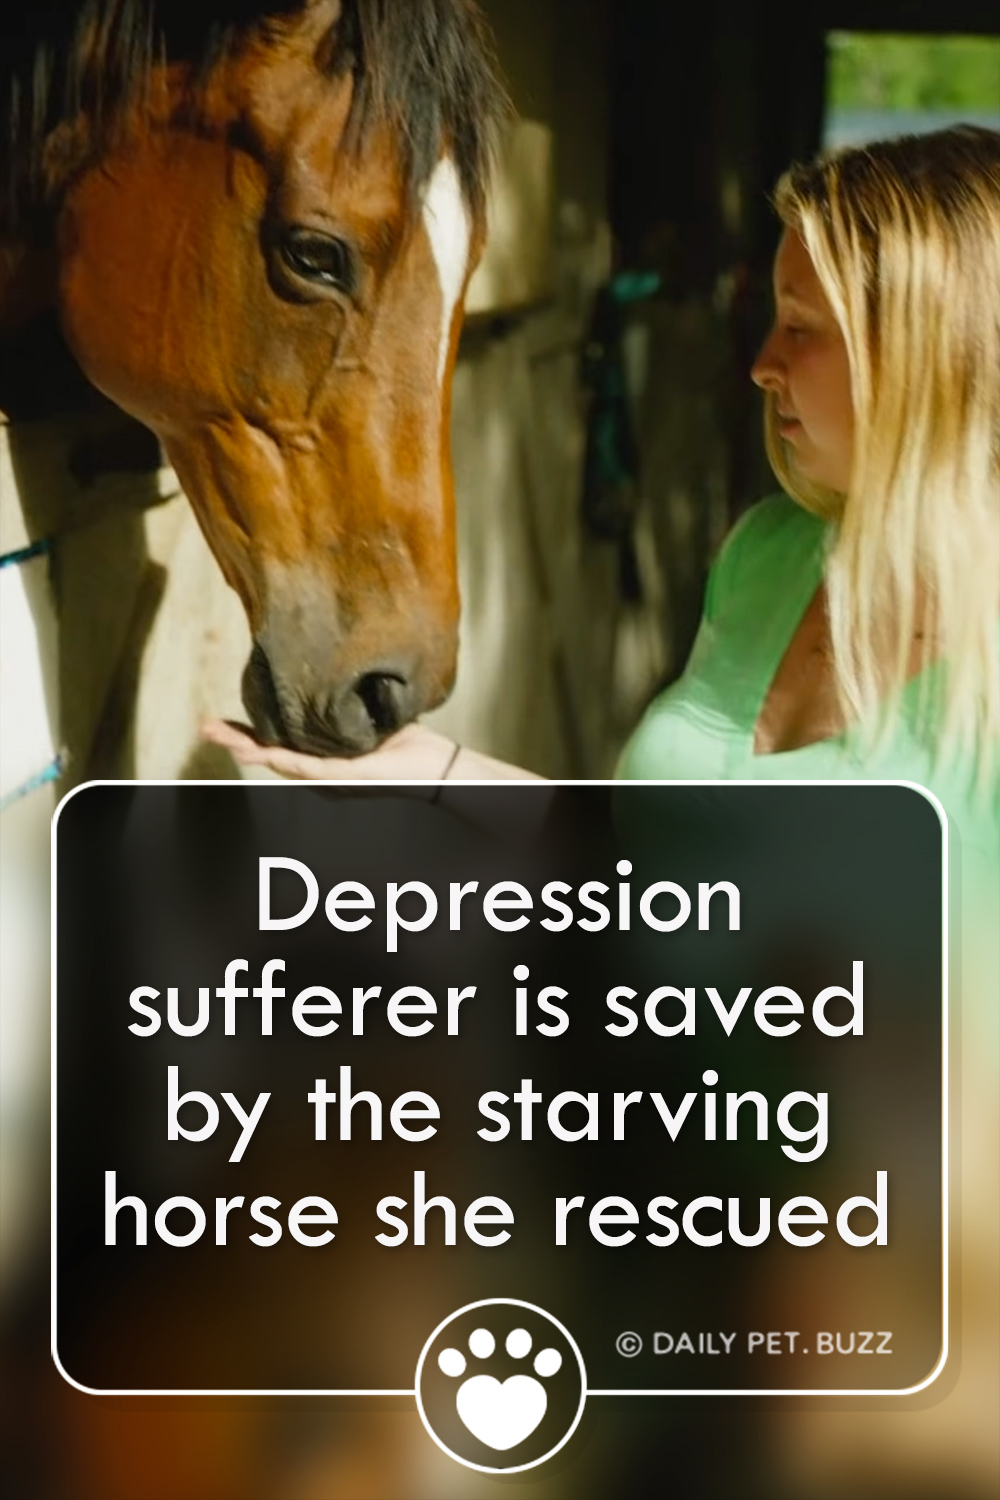 Depression sufferer is saved by the starving horse she rescued